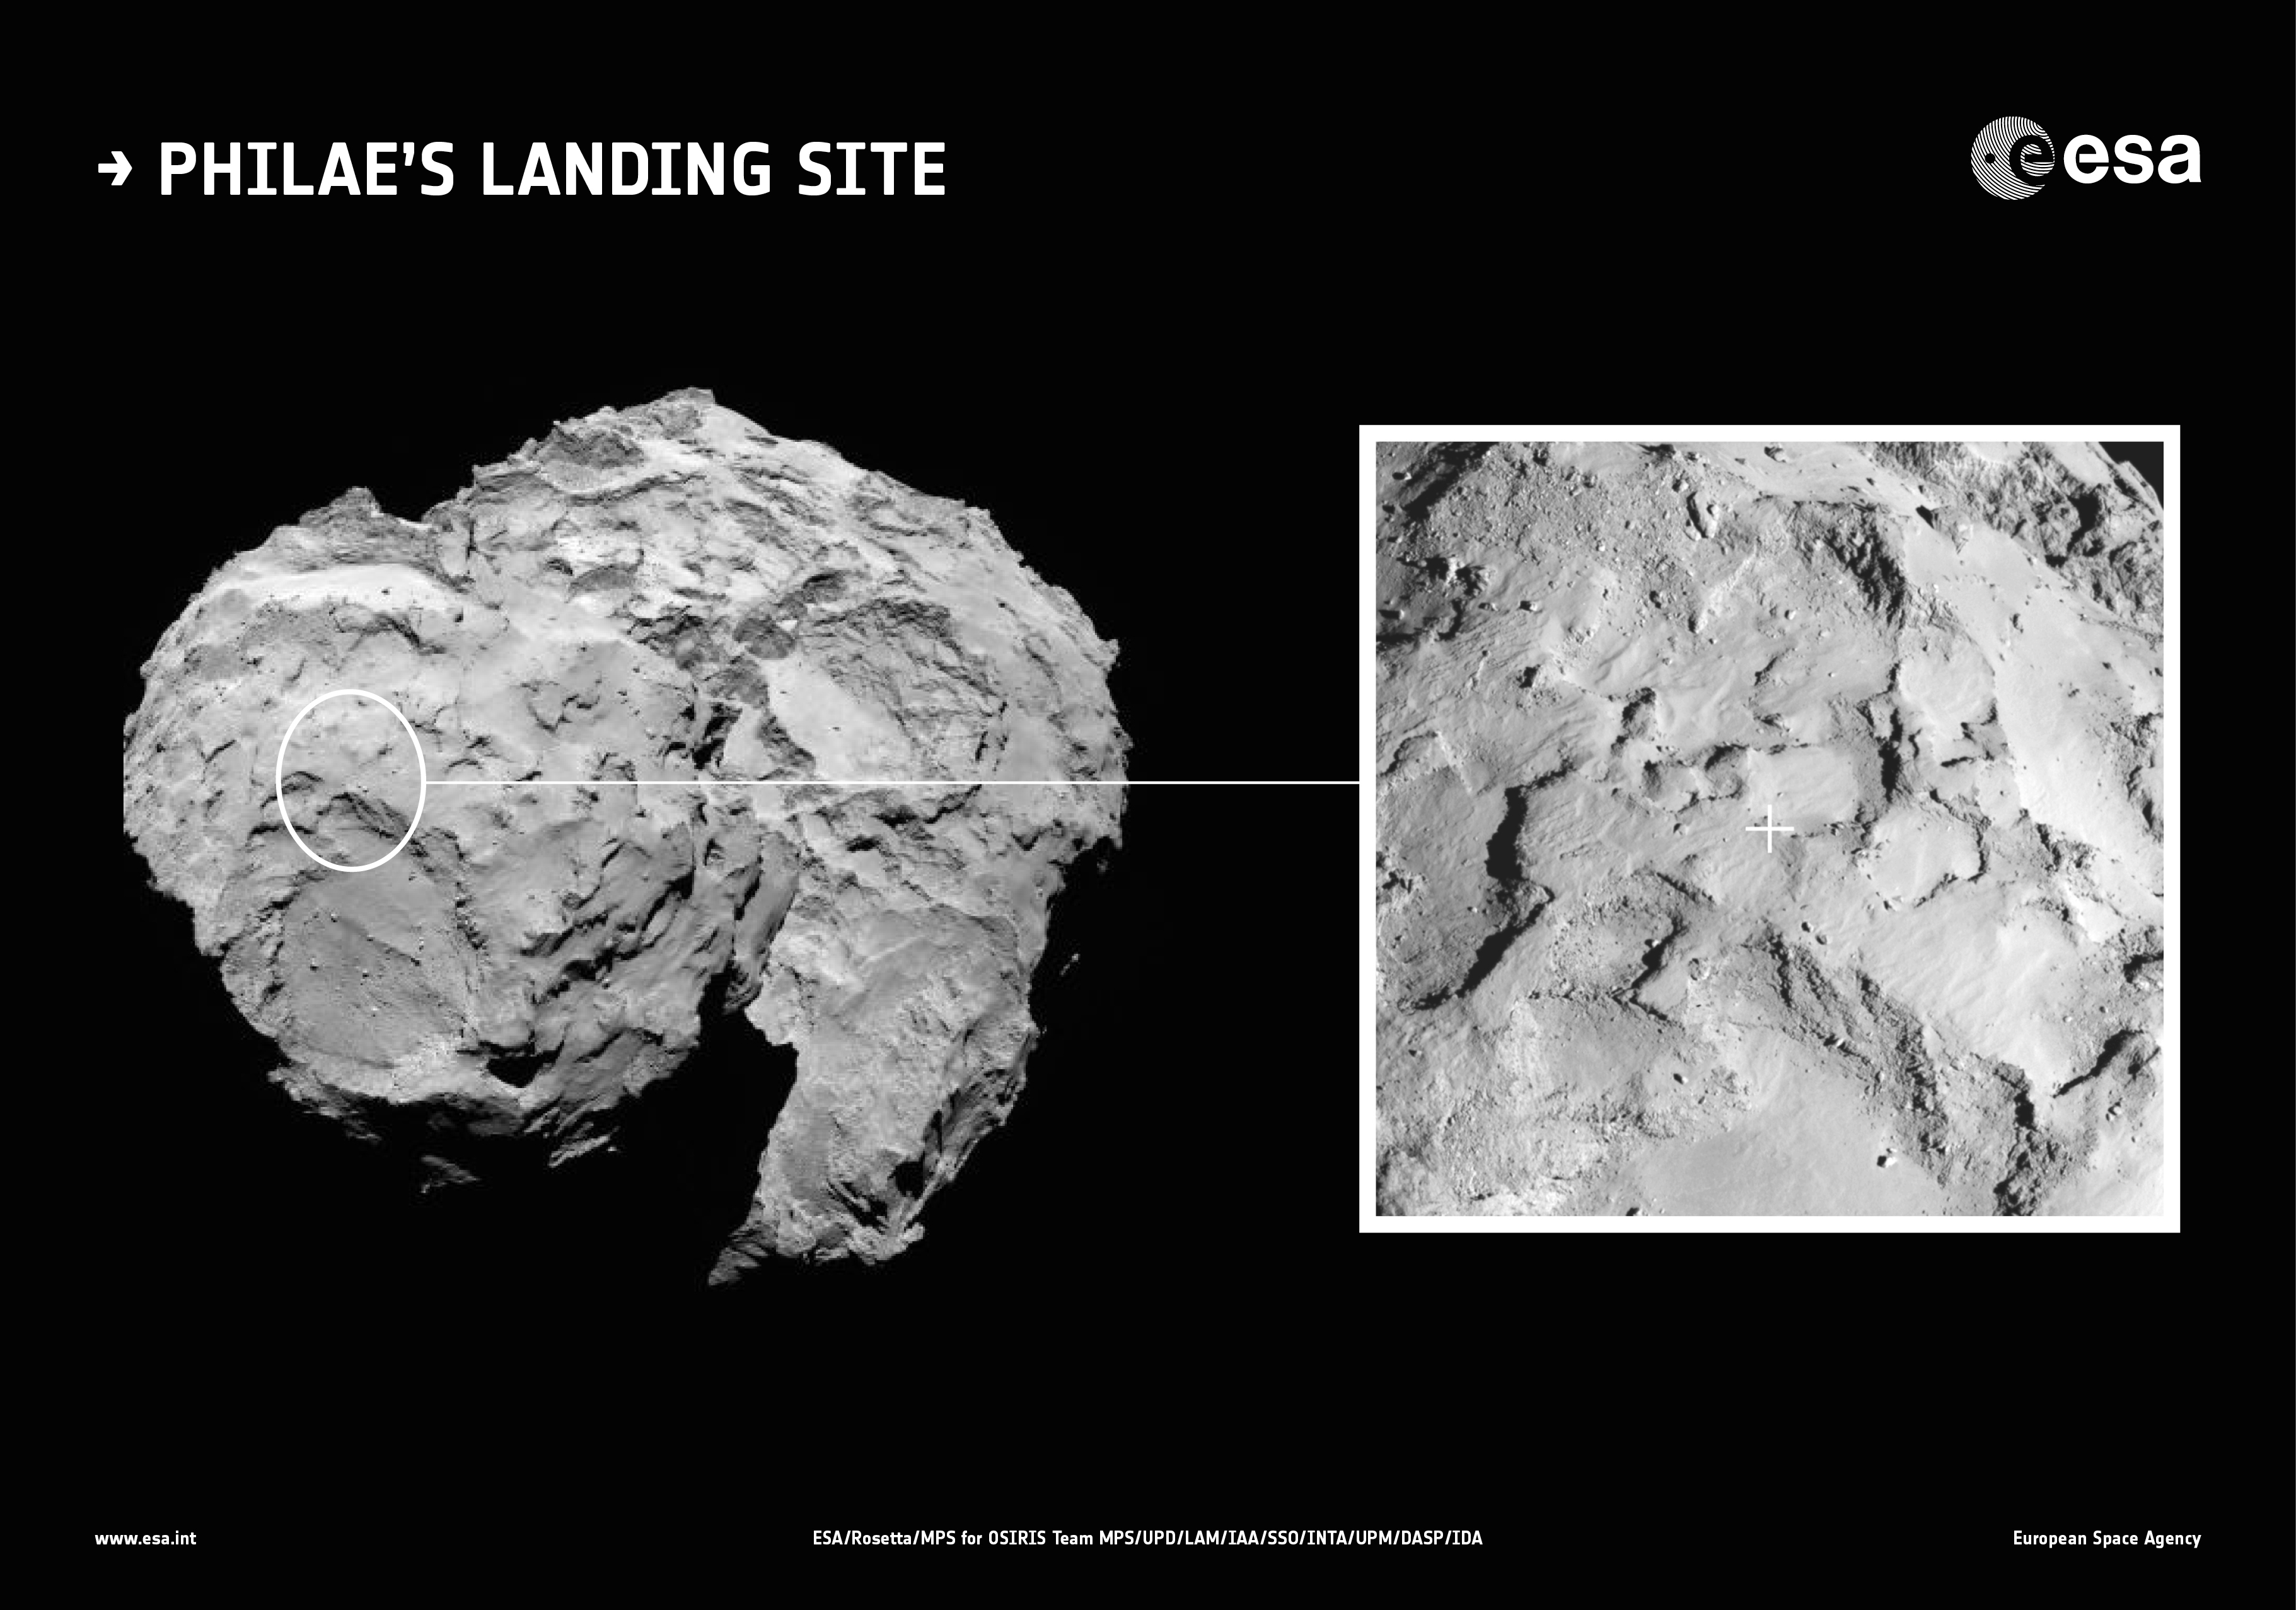 The landing site in context with the rest of the comet. Image Credit: ESA/Rosetta/MPS for OSIRIS Team MPS/UPD/LAM/IAA/SSO/INTA/UPM/DASP/IDA